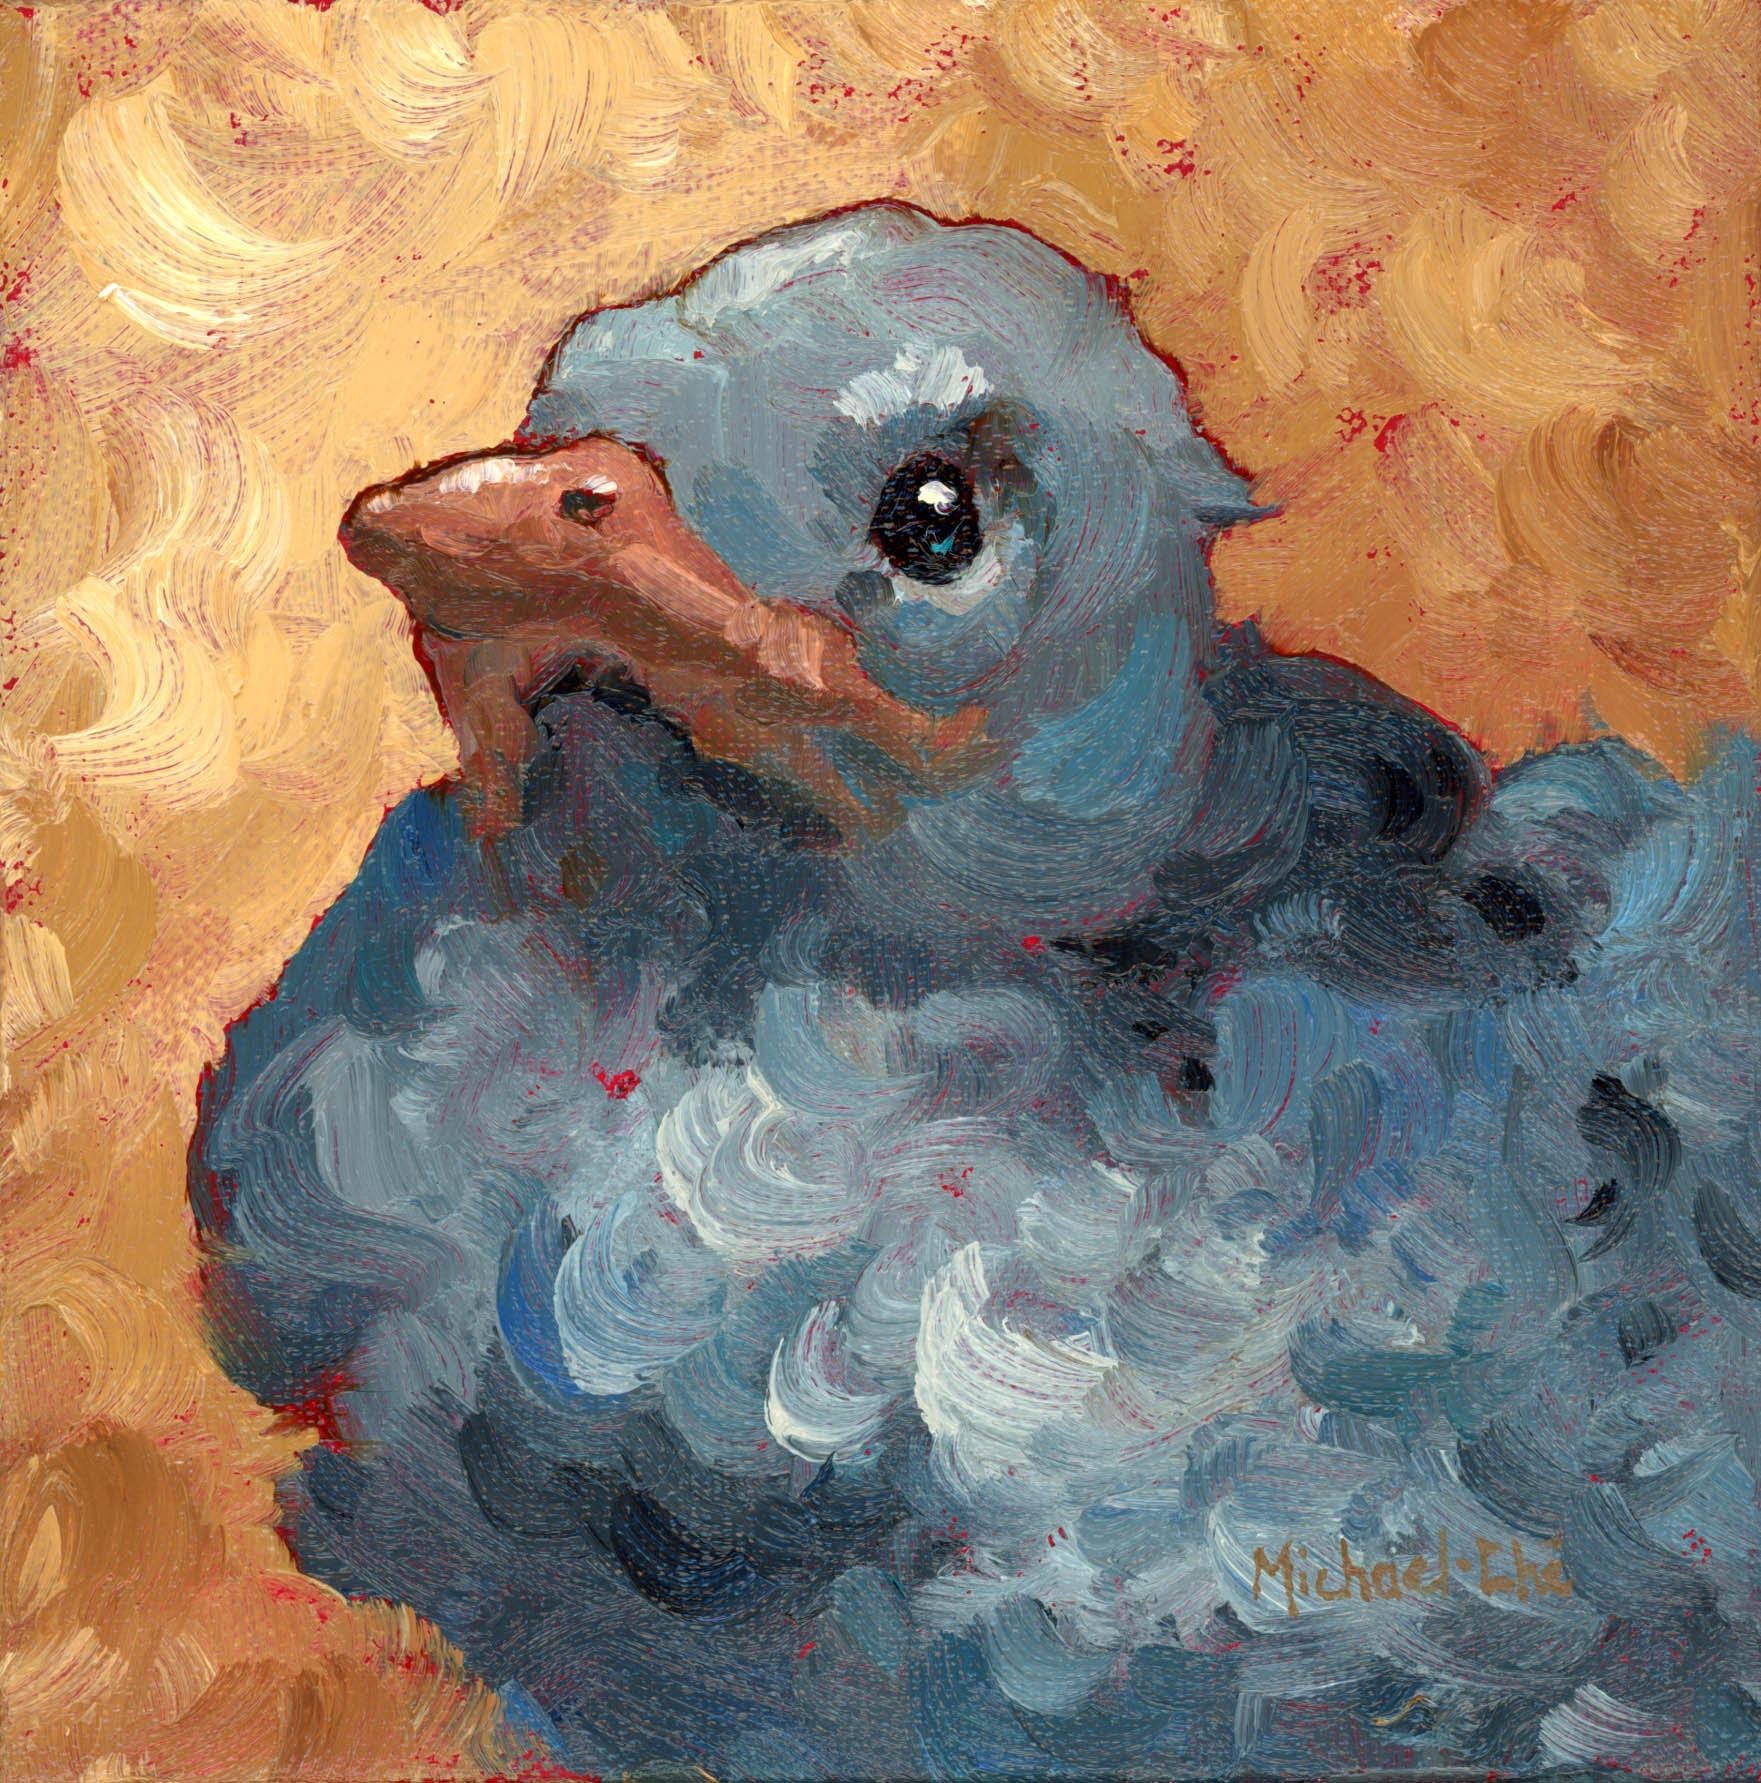 Michael-Che Swisher Animal Painting - "Baby Jay" Impasto oil painting of a grey bird on gold background